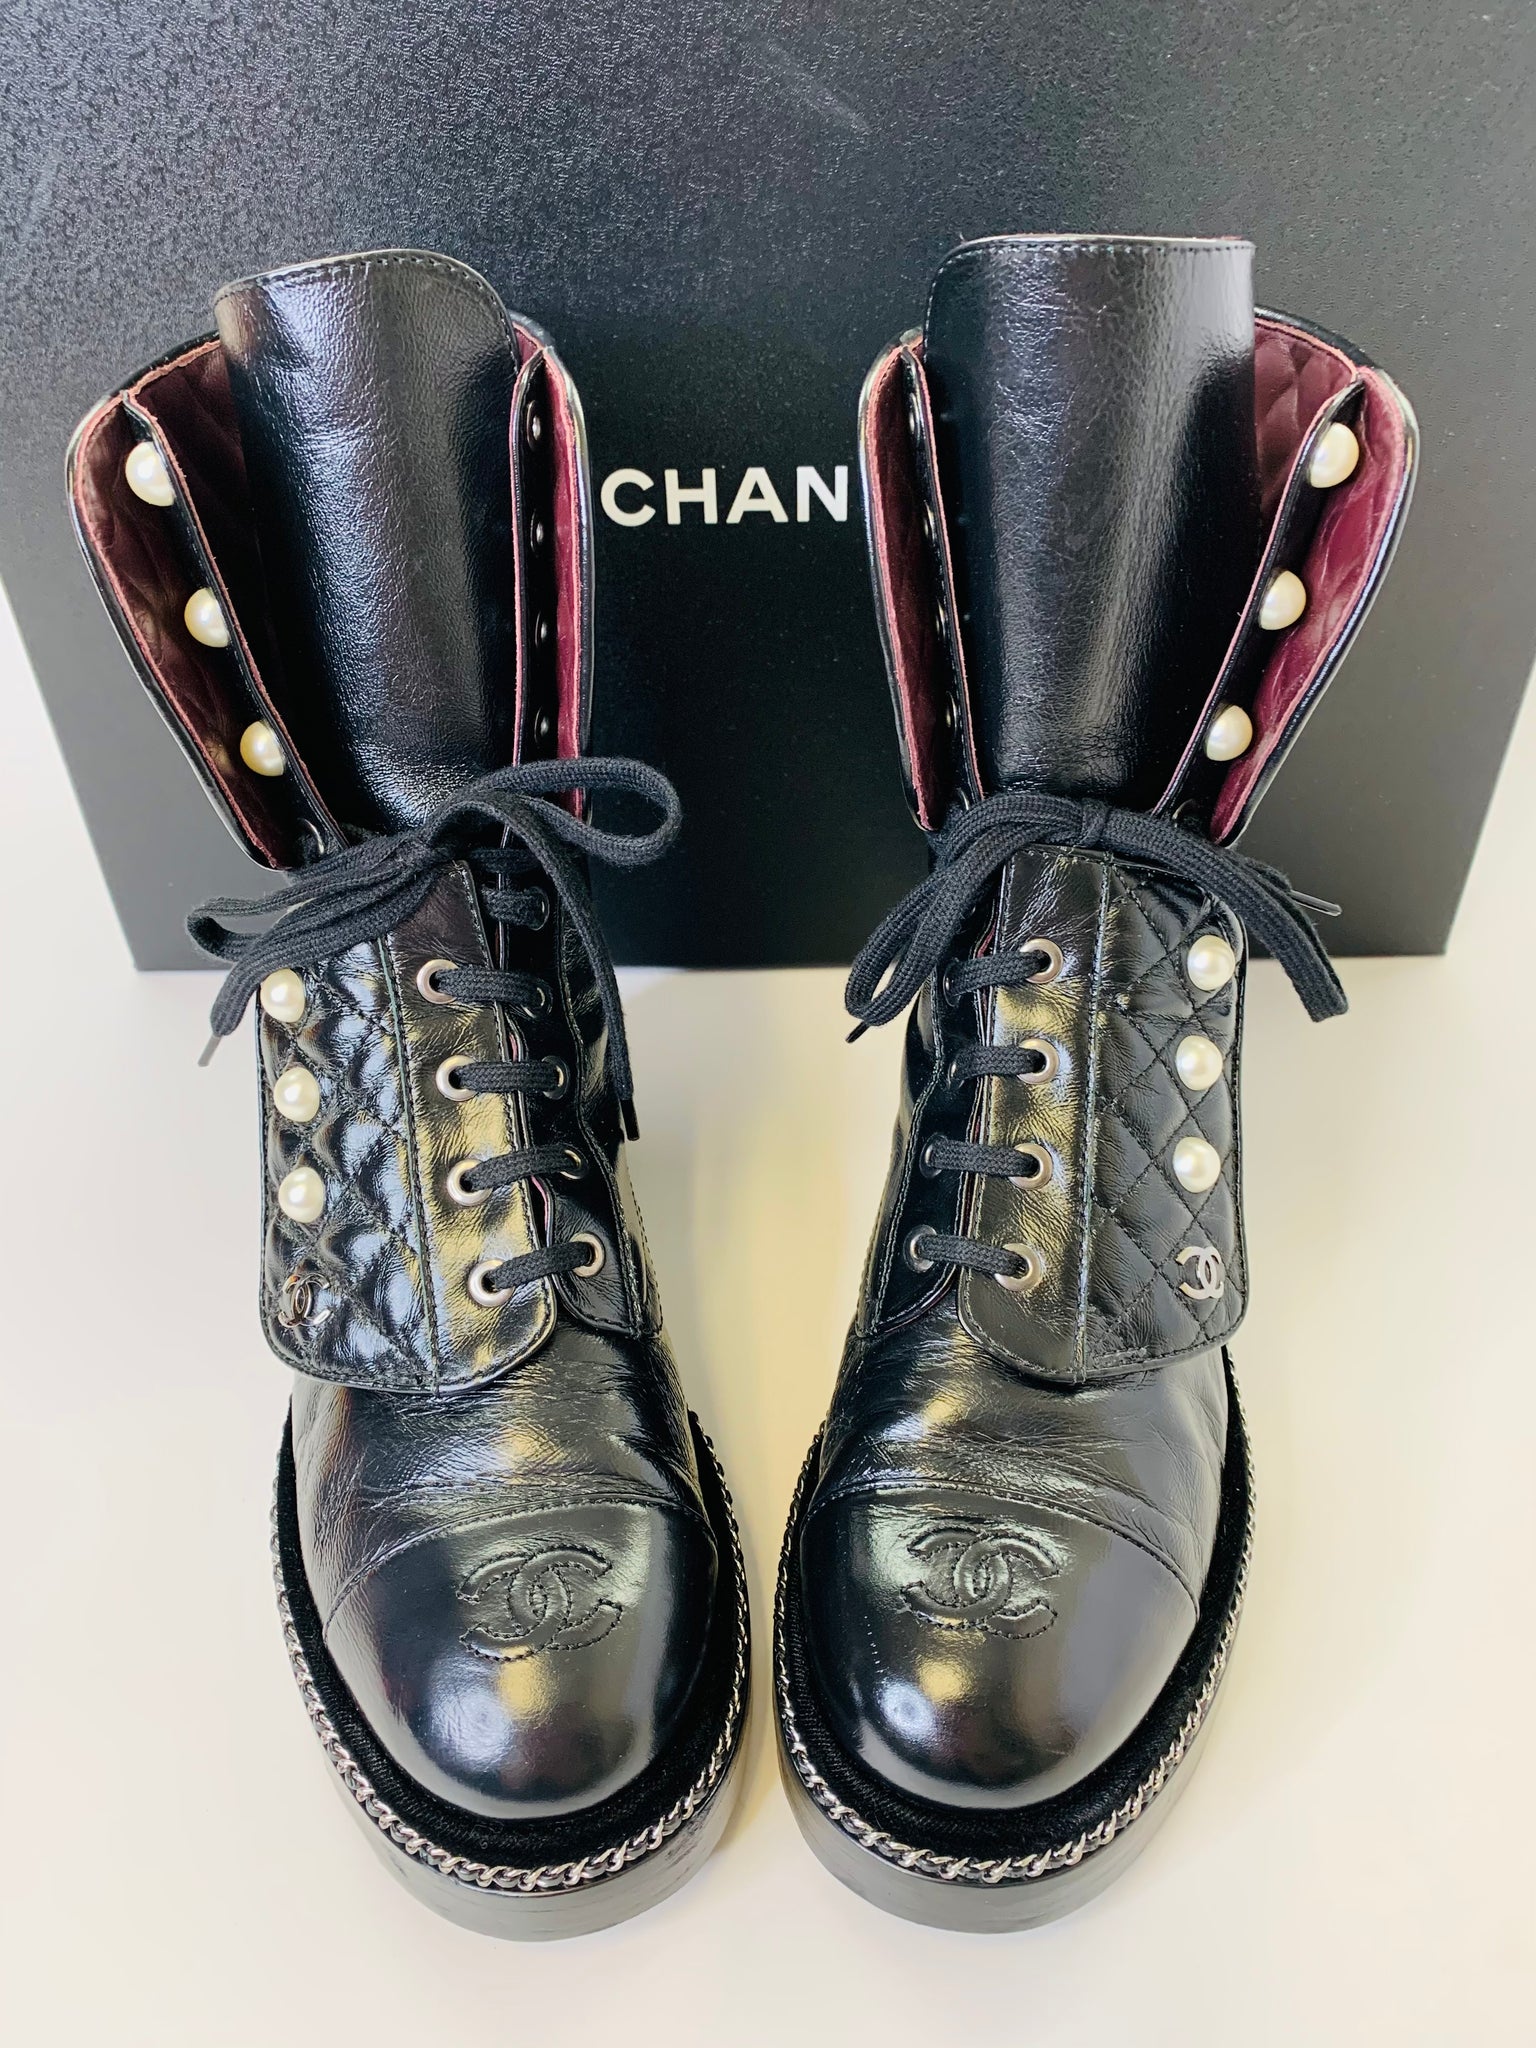 Chanel Leather Chain Around Lace Up Combat Boots in White and Black Size 37.5